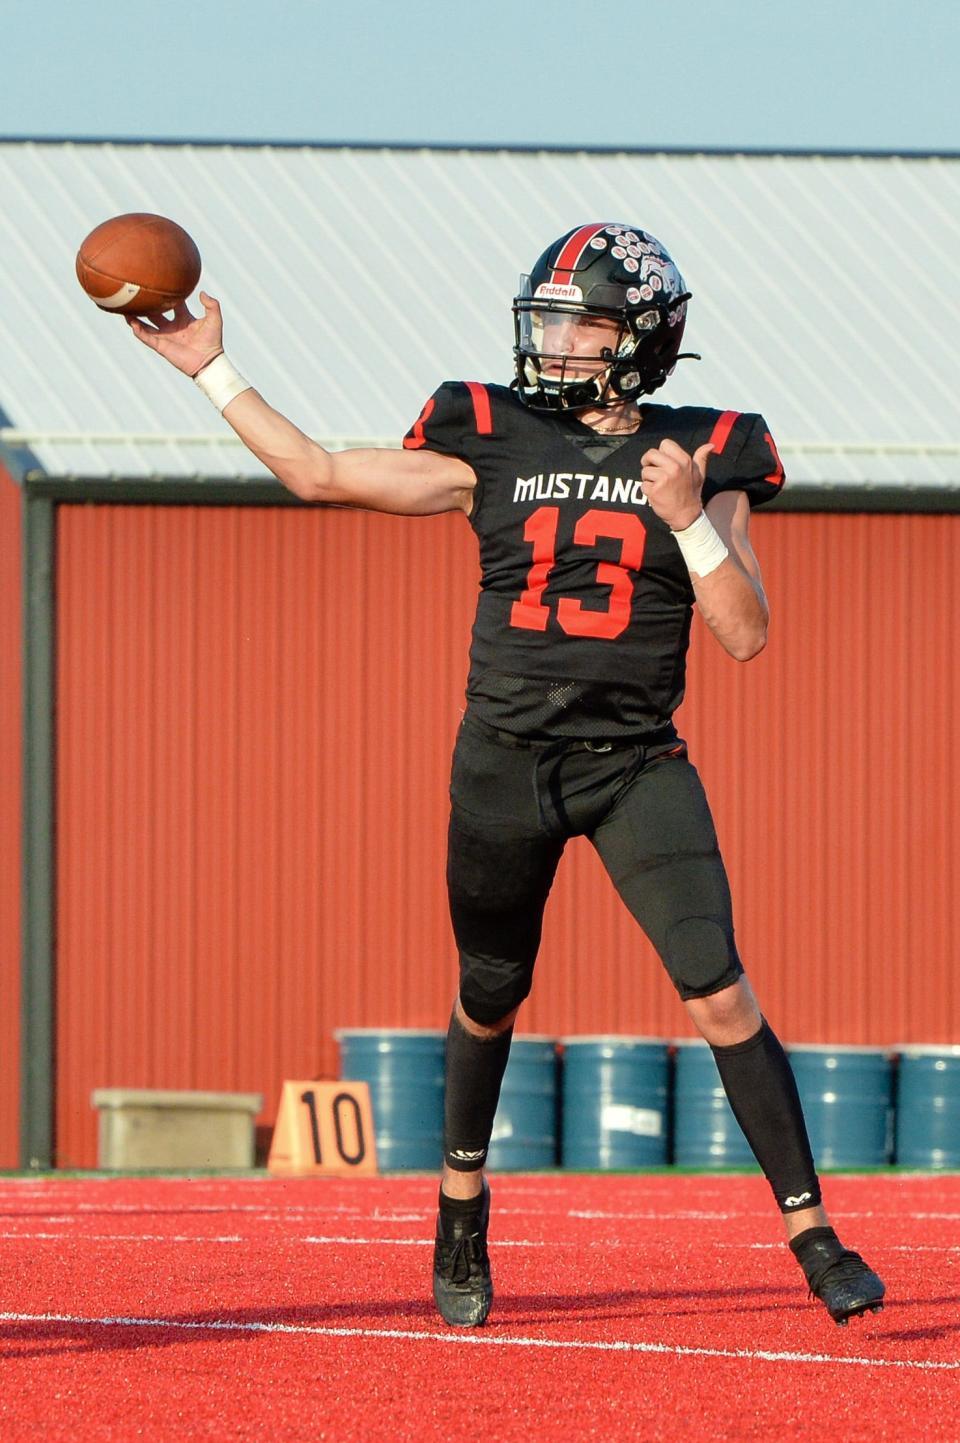 Jakob Lanning (13) makes a pass for the Mustangs during a scrimmage against Bloomington North Friday night at Edgewood. 